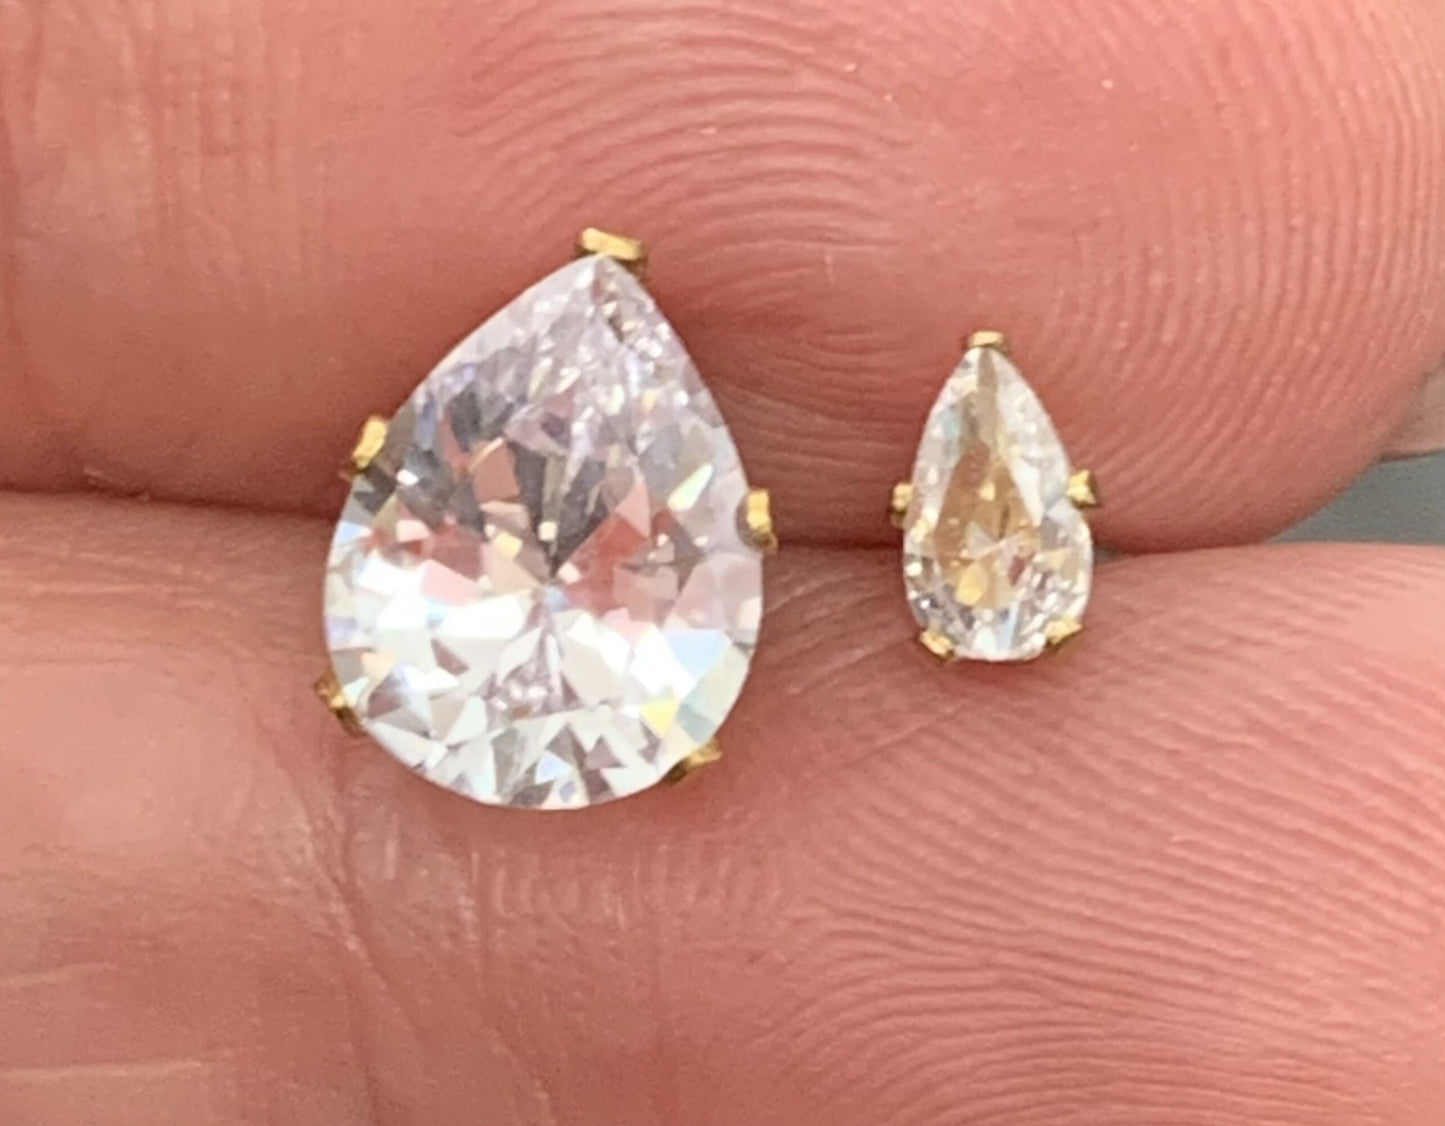 PAIR of Beautiful Hypoallergenic Clear CZ Gem Teardrop Gold Stud Earrings - 3mm, 4mm, 5mm, 6mm & 7mm Gem Size Available!